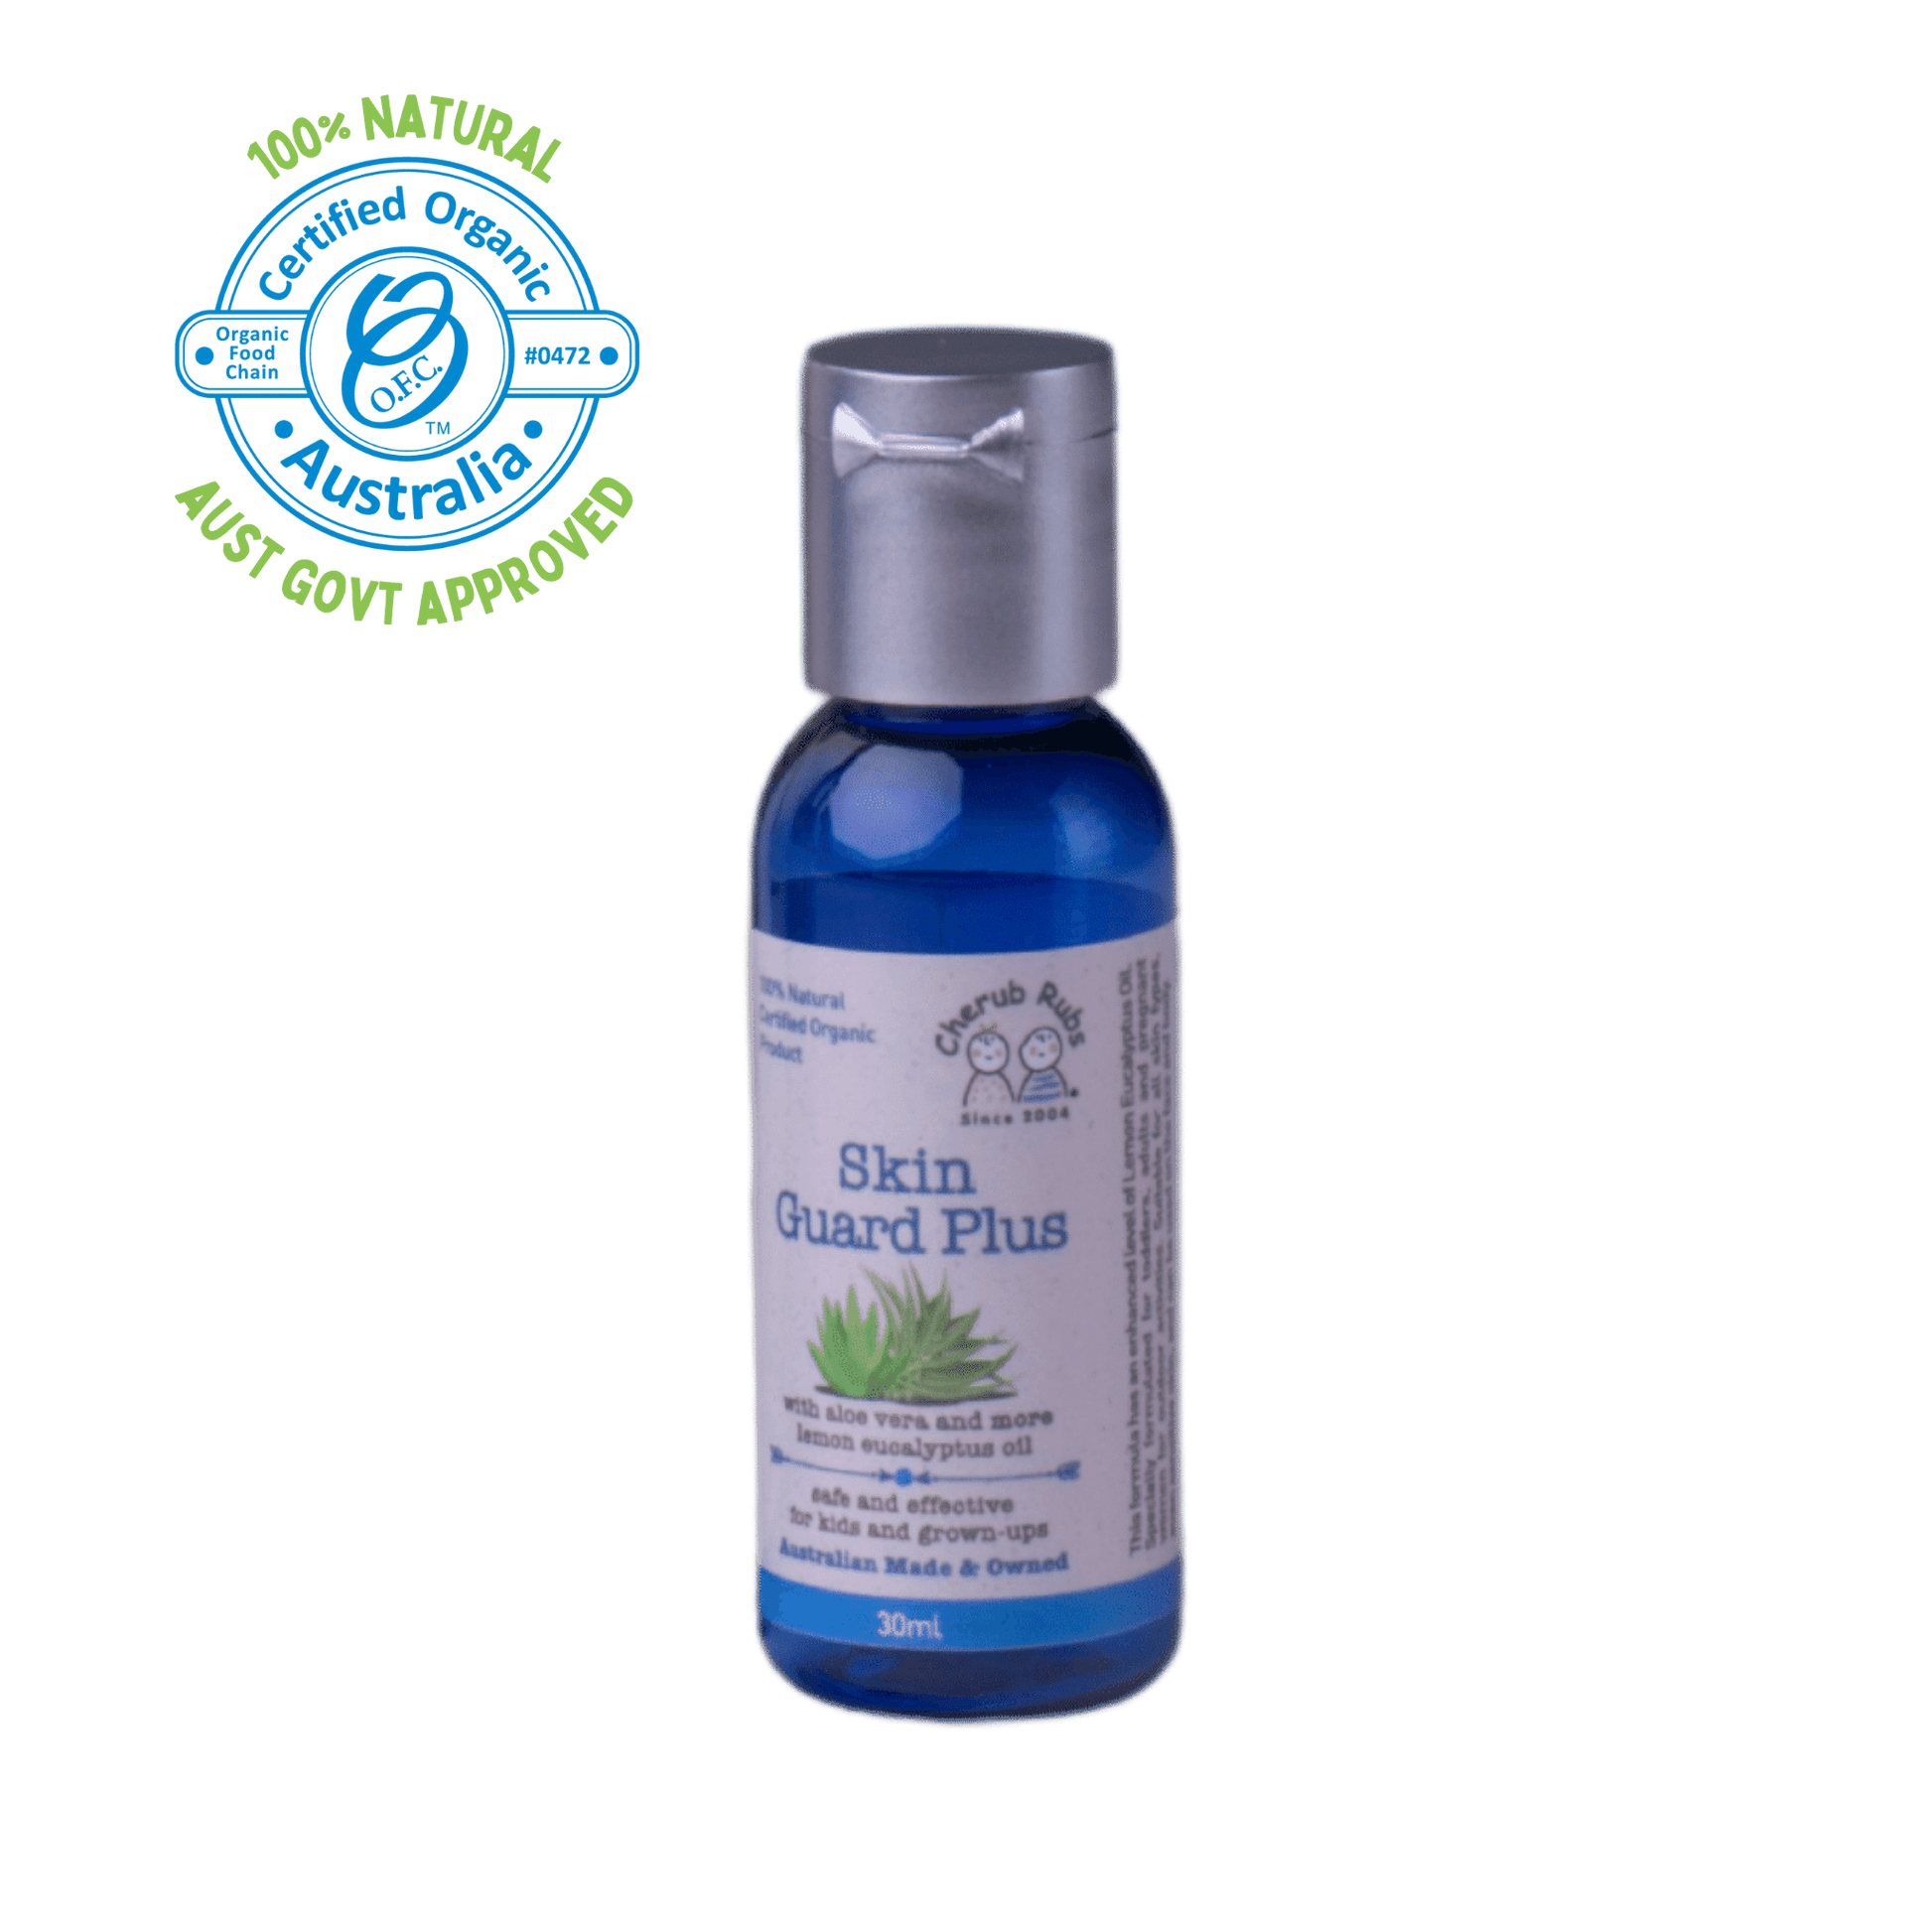 Skin Guard Plus 30ml, a natural skincare range help to keep away the mozzies. Organic Skincare For Baby & Family by Cherub Rubs.